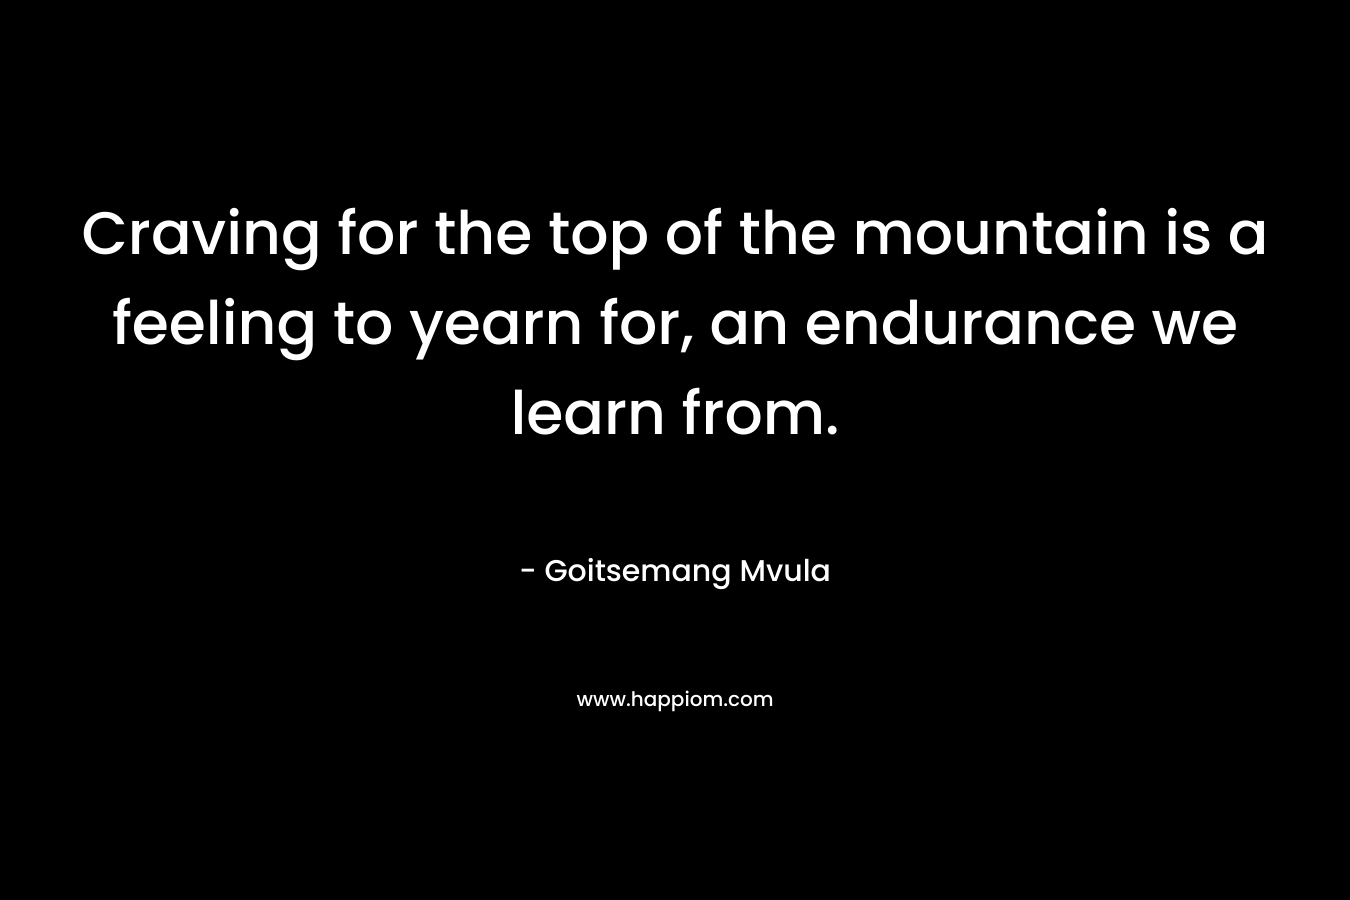 Craving for the top of the mountain is a feeling to yearn for, an endurance we learn from. – Goitsemang Mvula